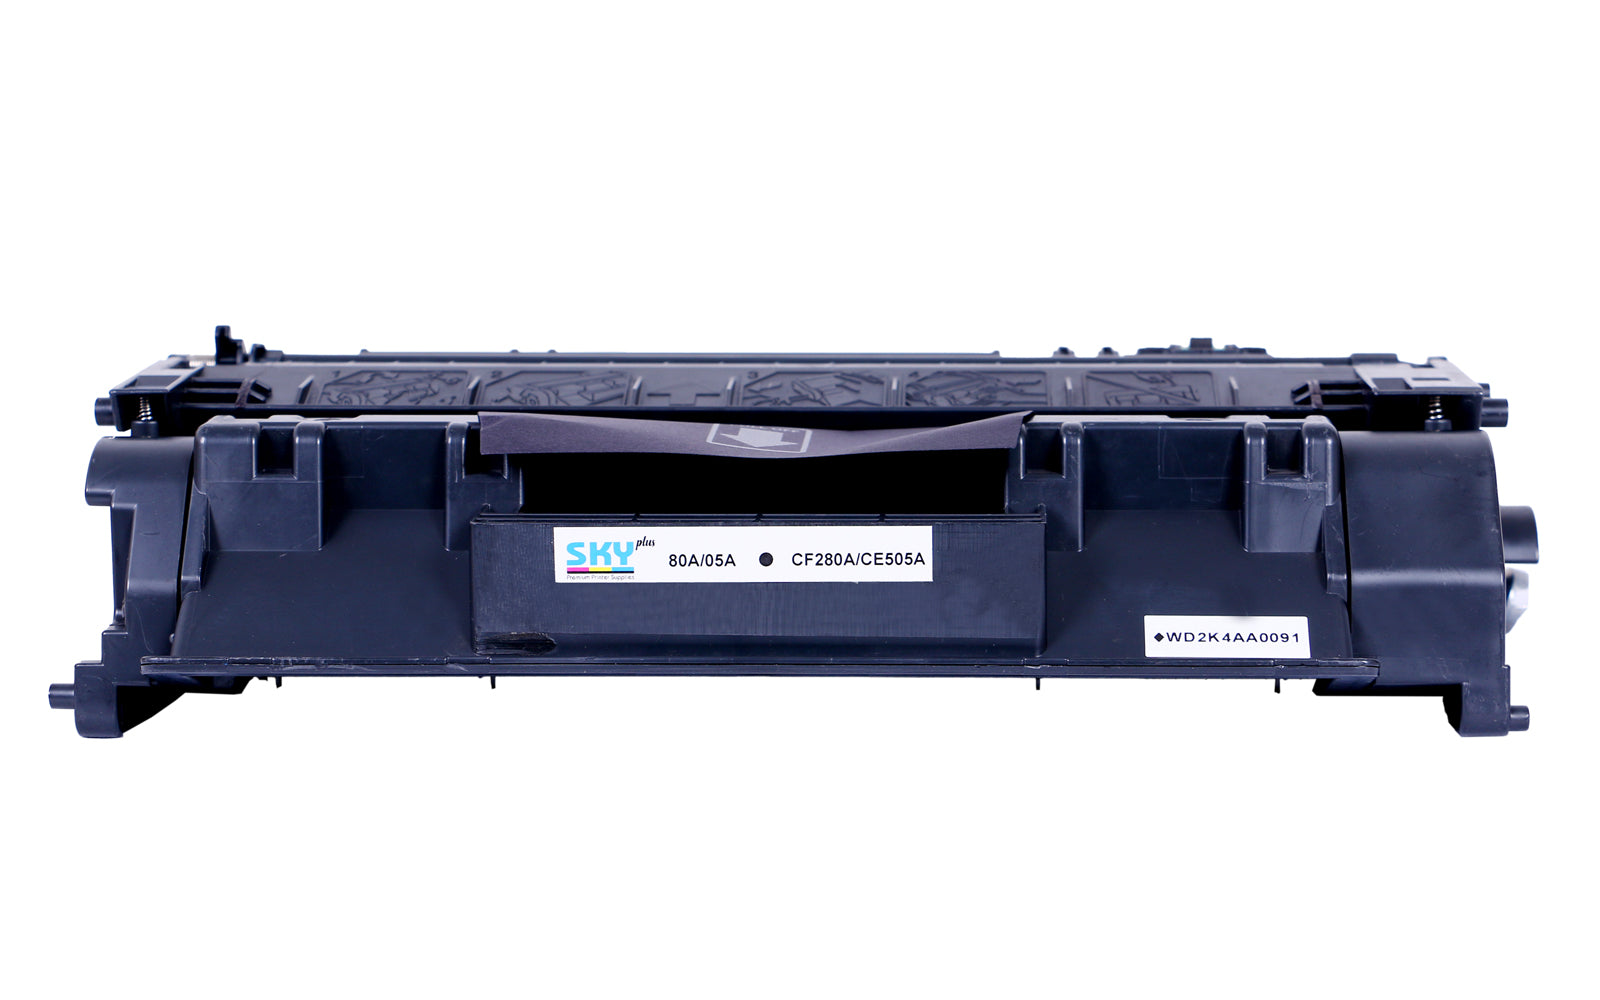 Sky Plus  05A  Remanufactured Toner Cartridge for   HP LaserJet P2030 P2035 and P2055